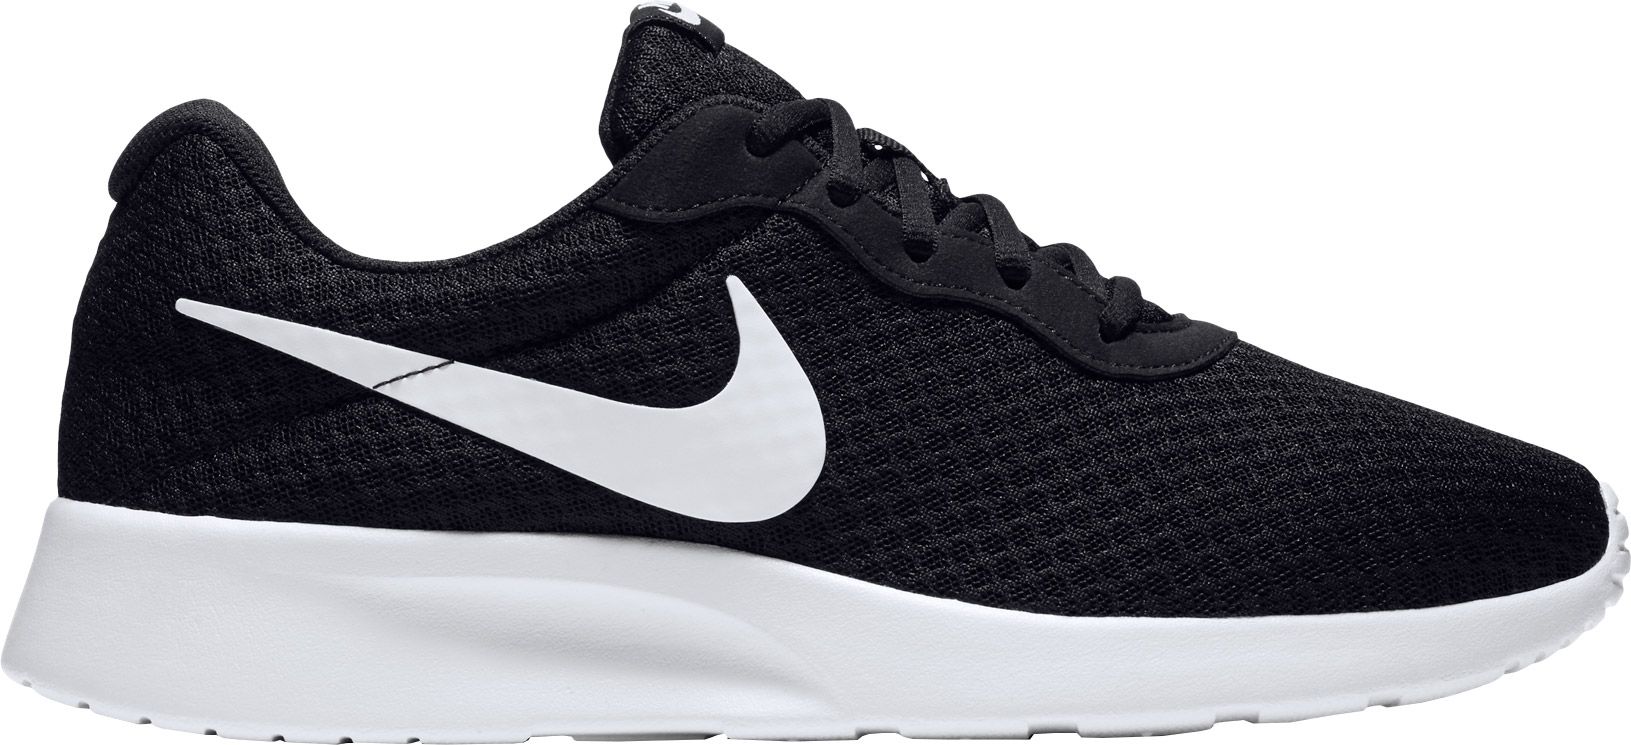 Men's Fashion Sneakers | DICK'S Sporting Goods